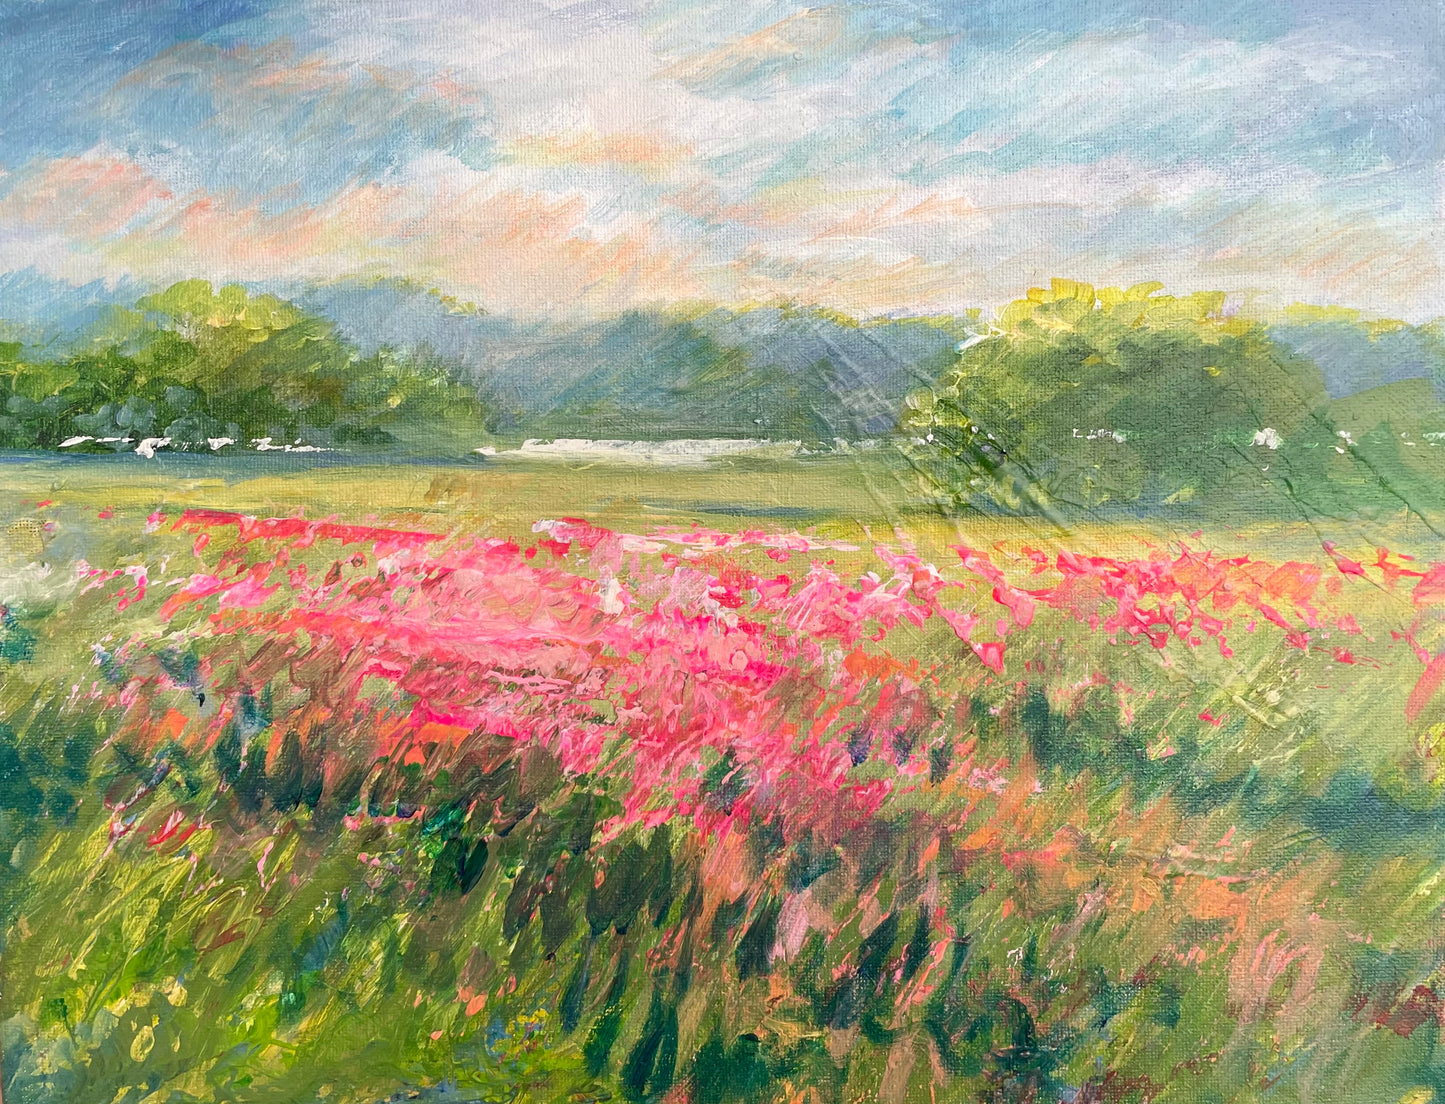 Field of Flowers Painting Class- Thursday, April 7th @7pm